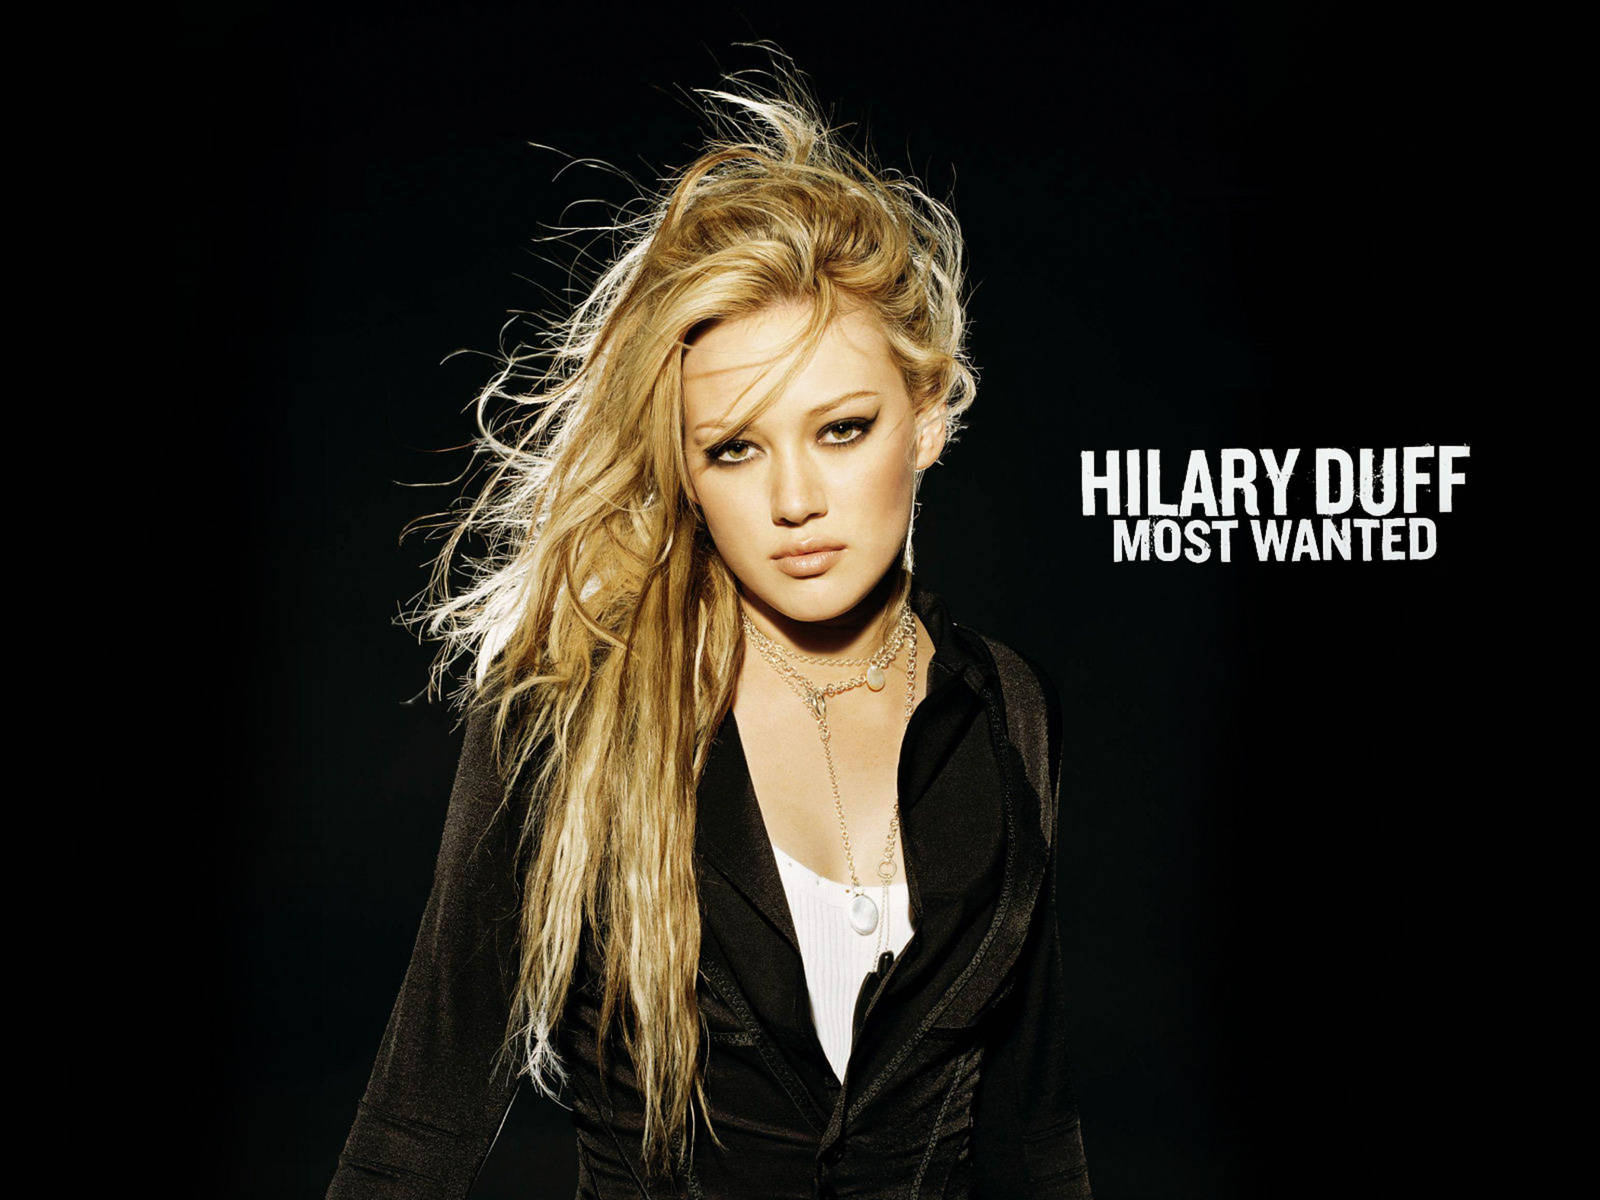 Hilary Duff Most Wanted